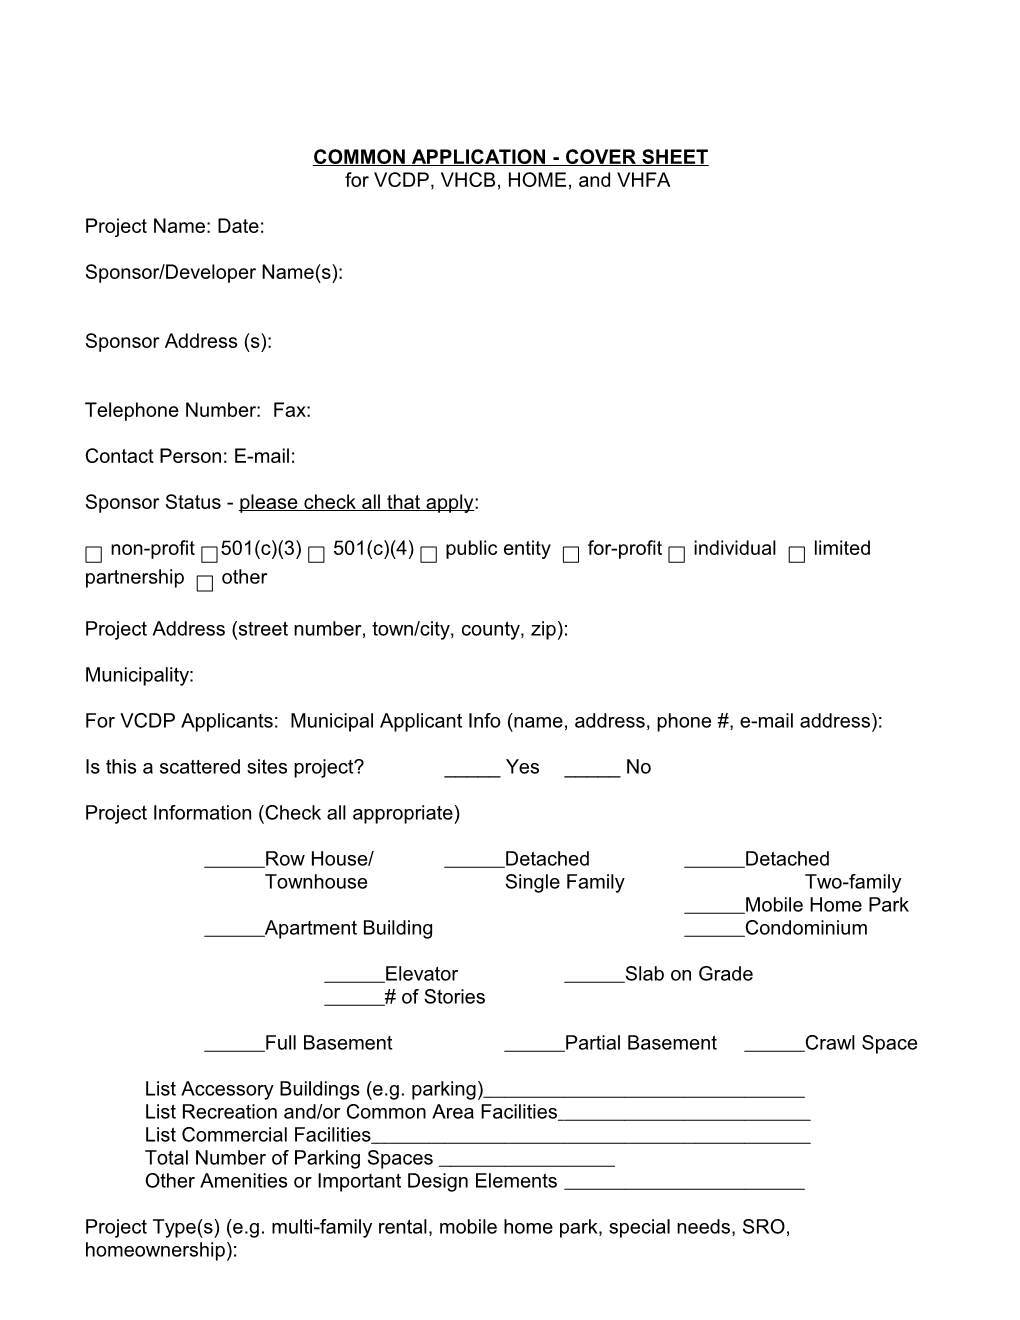 Common Application - Cover Sheet